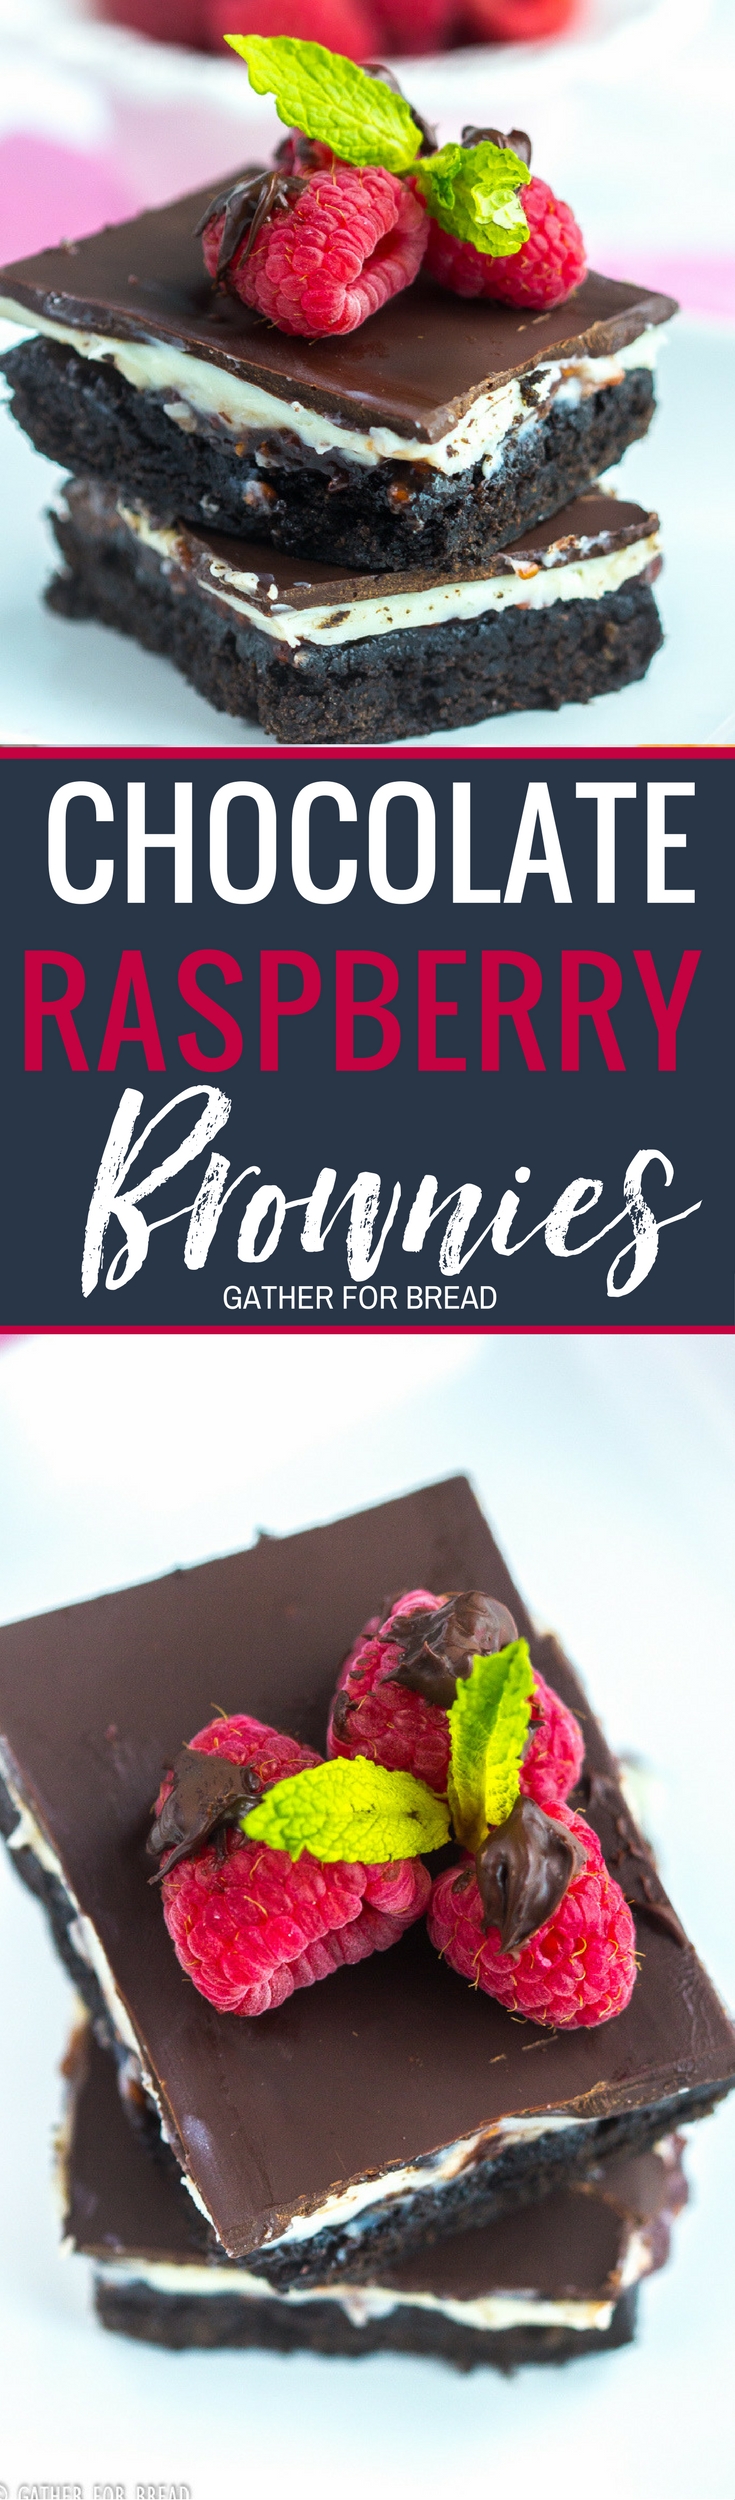 Chocolate Raspberry Brownies - Chocolate brownies layered with cream filling raspberry jam and topped with semisweet chocolate. Delicious bars are the best with a cream cheese layer and delicious raspberry jam. #brownies #berries #dessert #bars #creamy